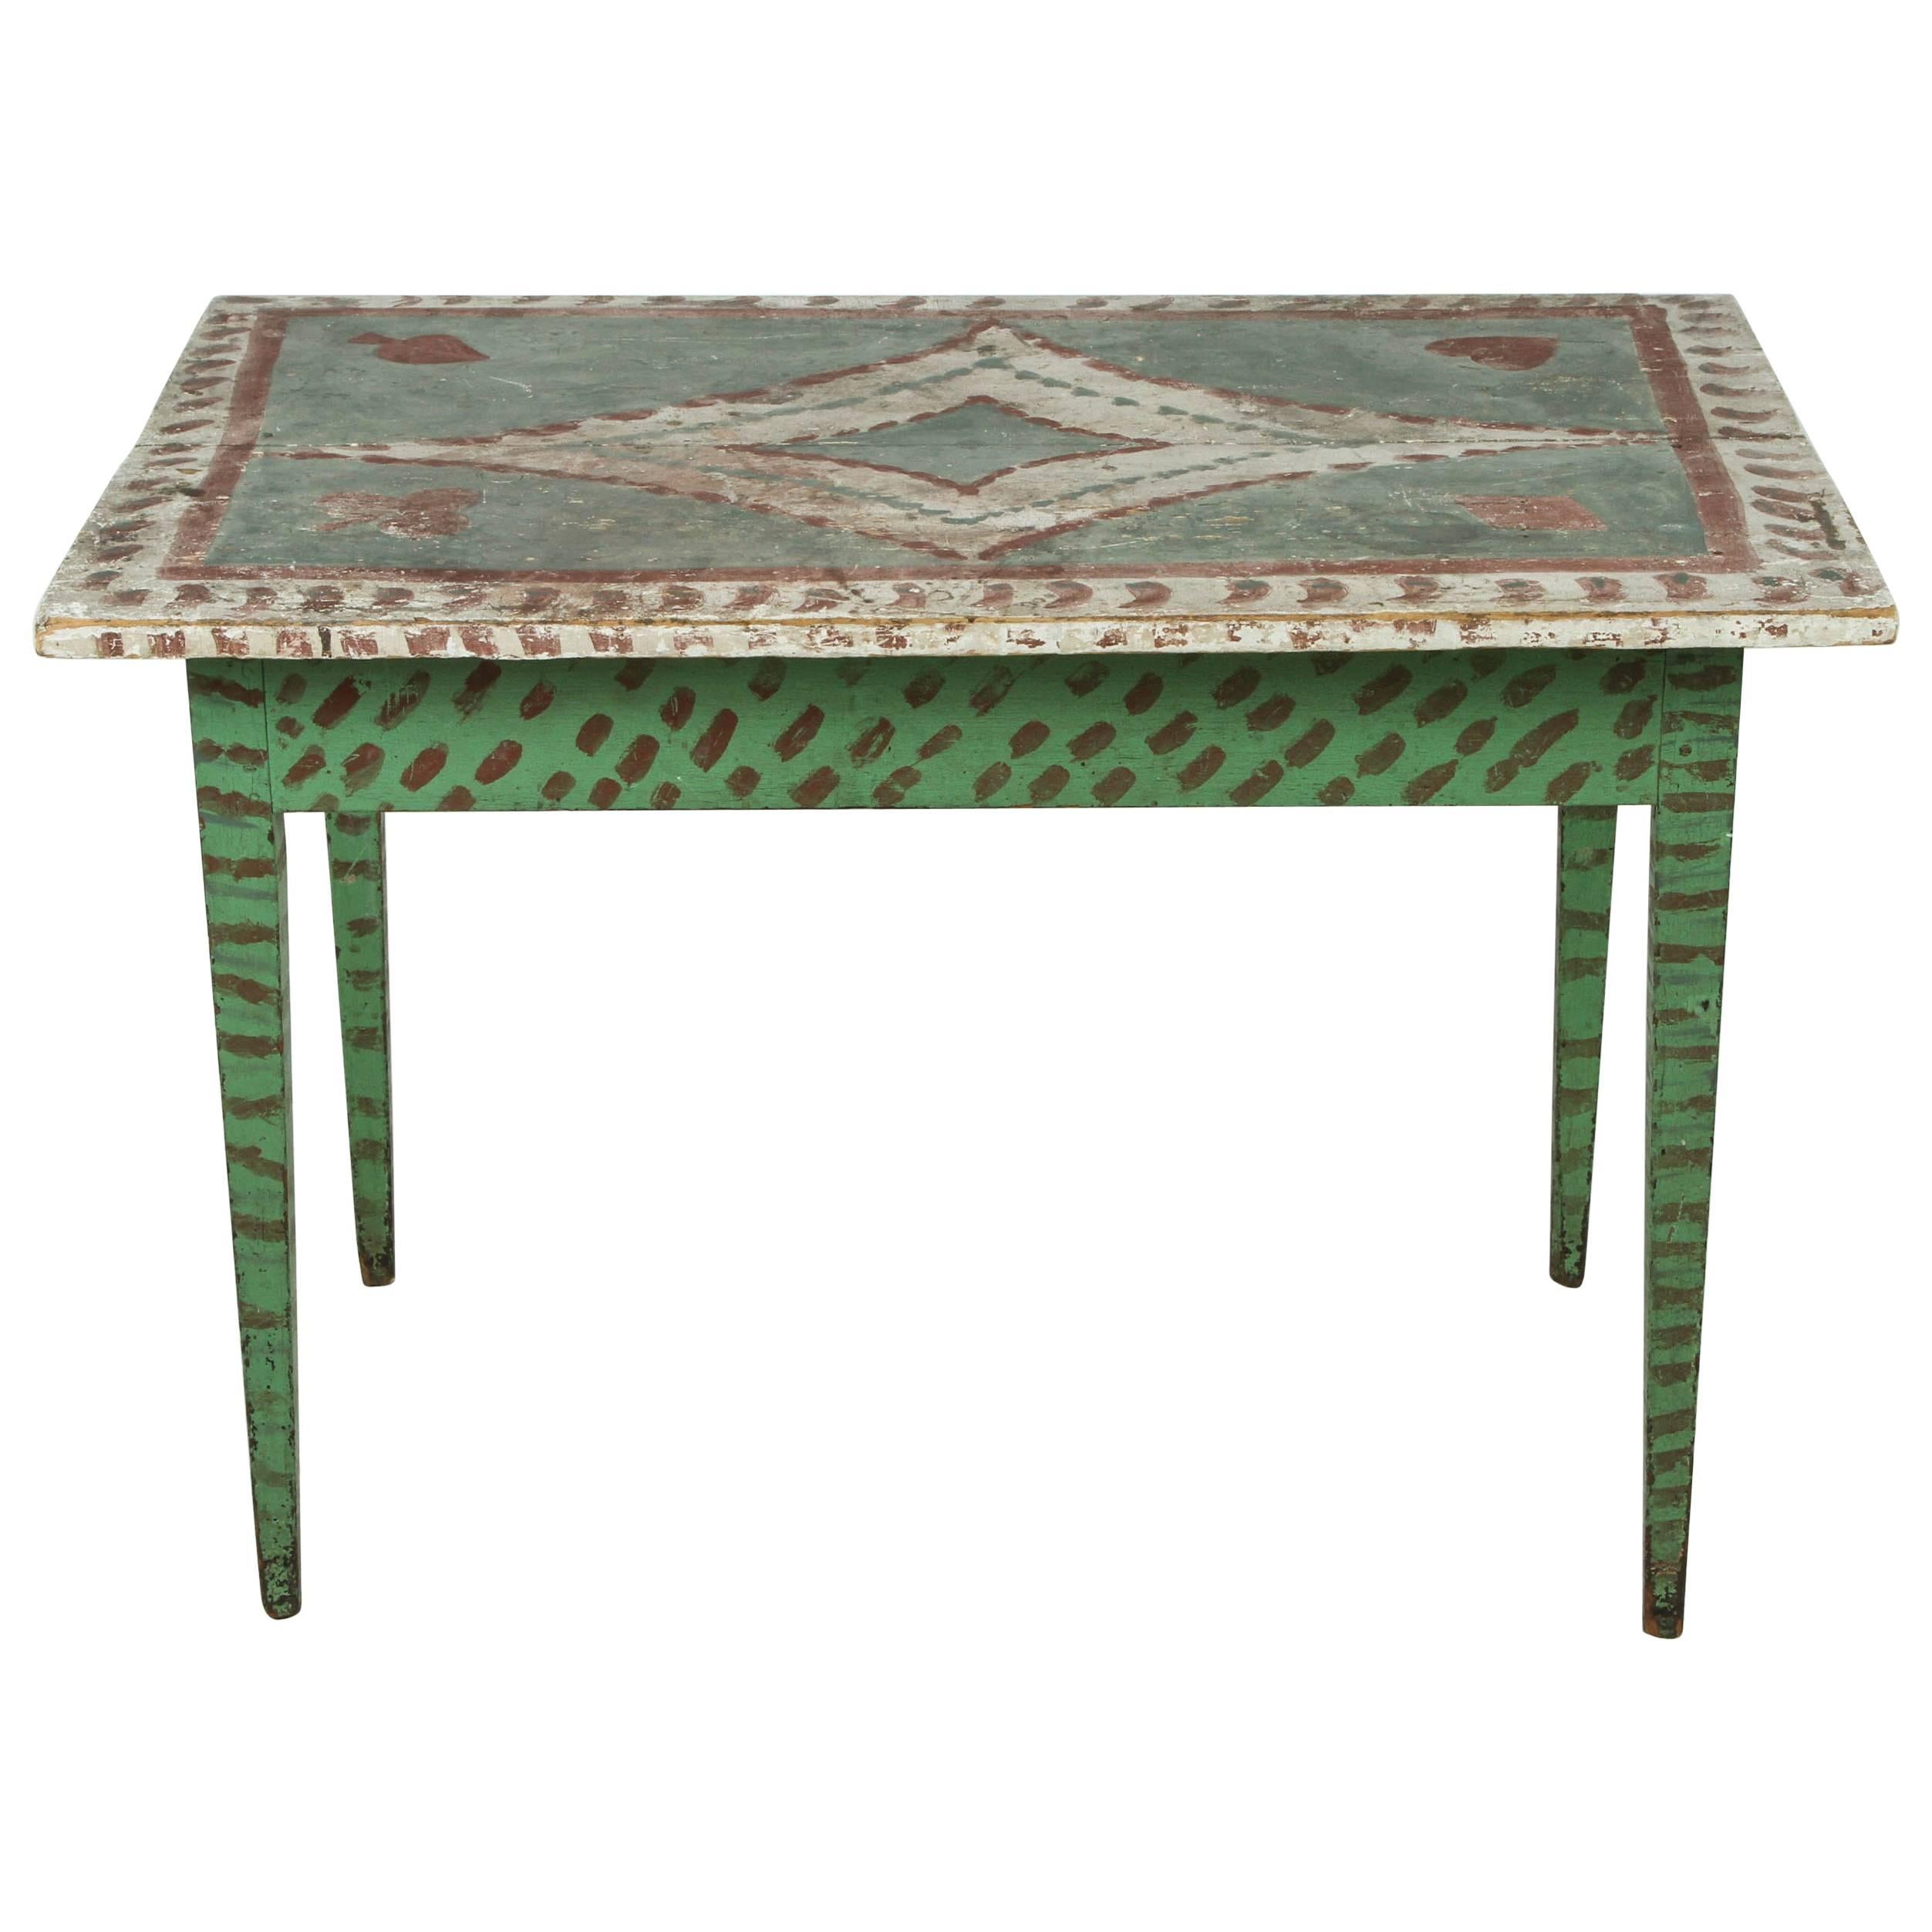 Green and Red Painted Folk Art Table